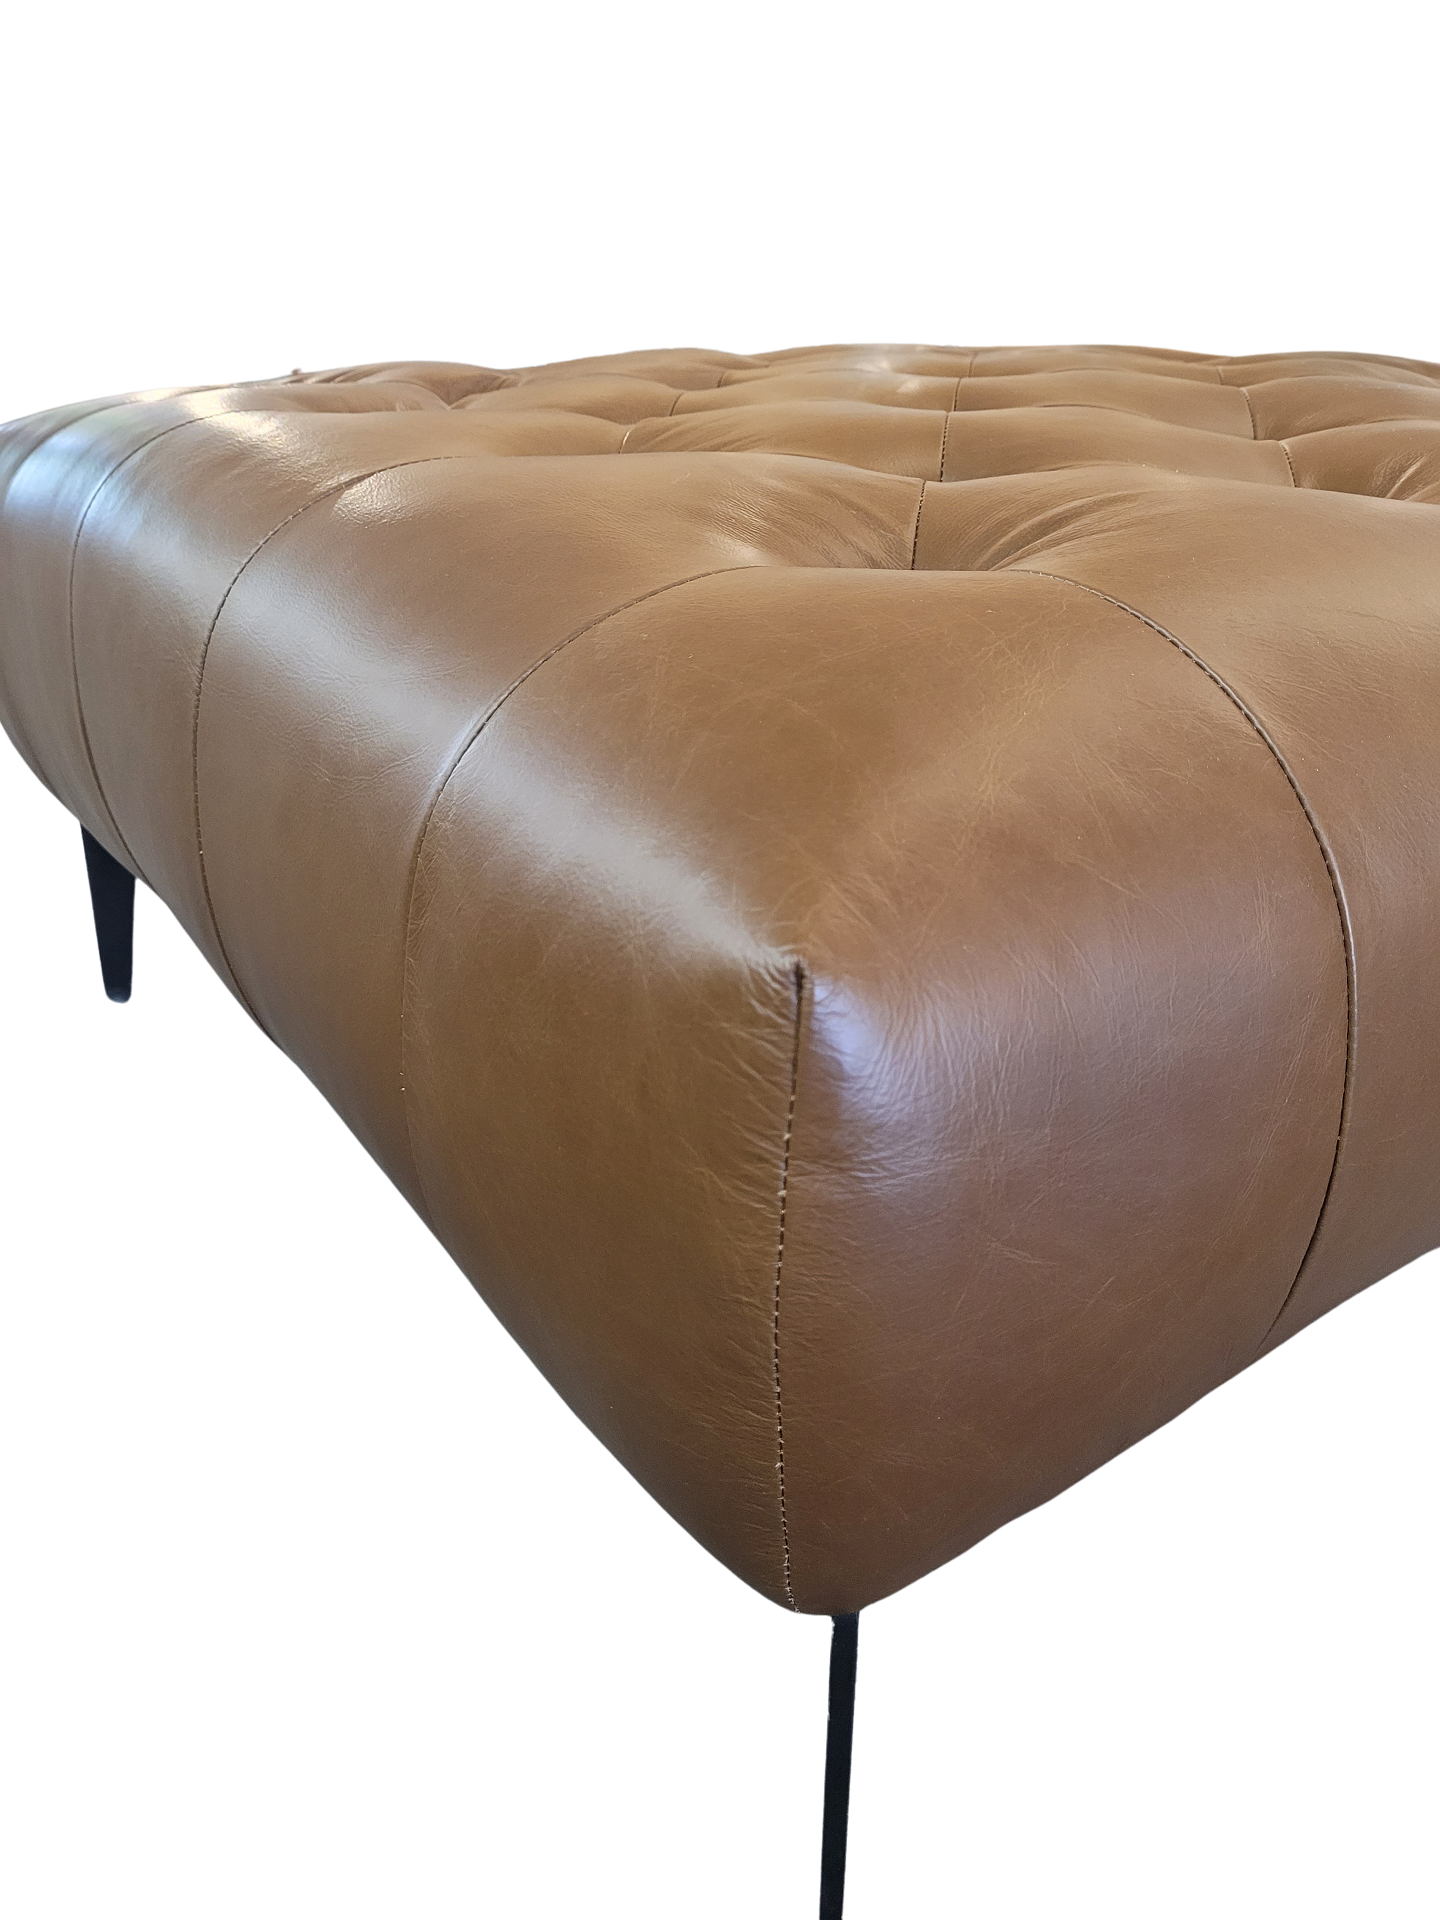 Chesterfield Footstool Leather